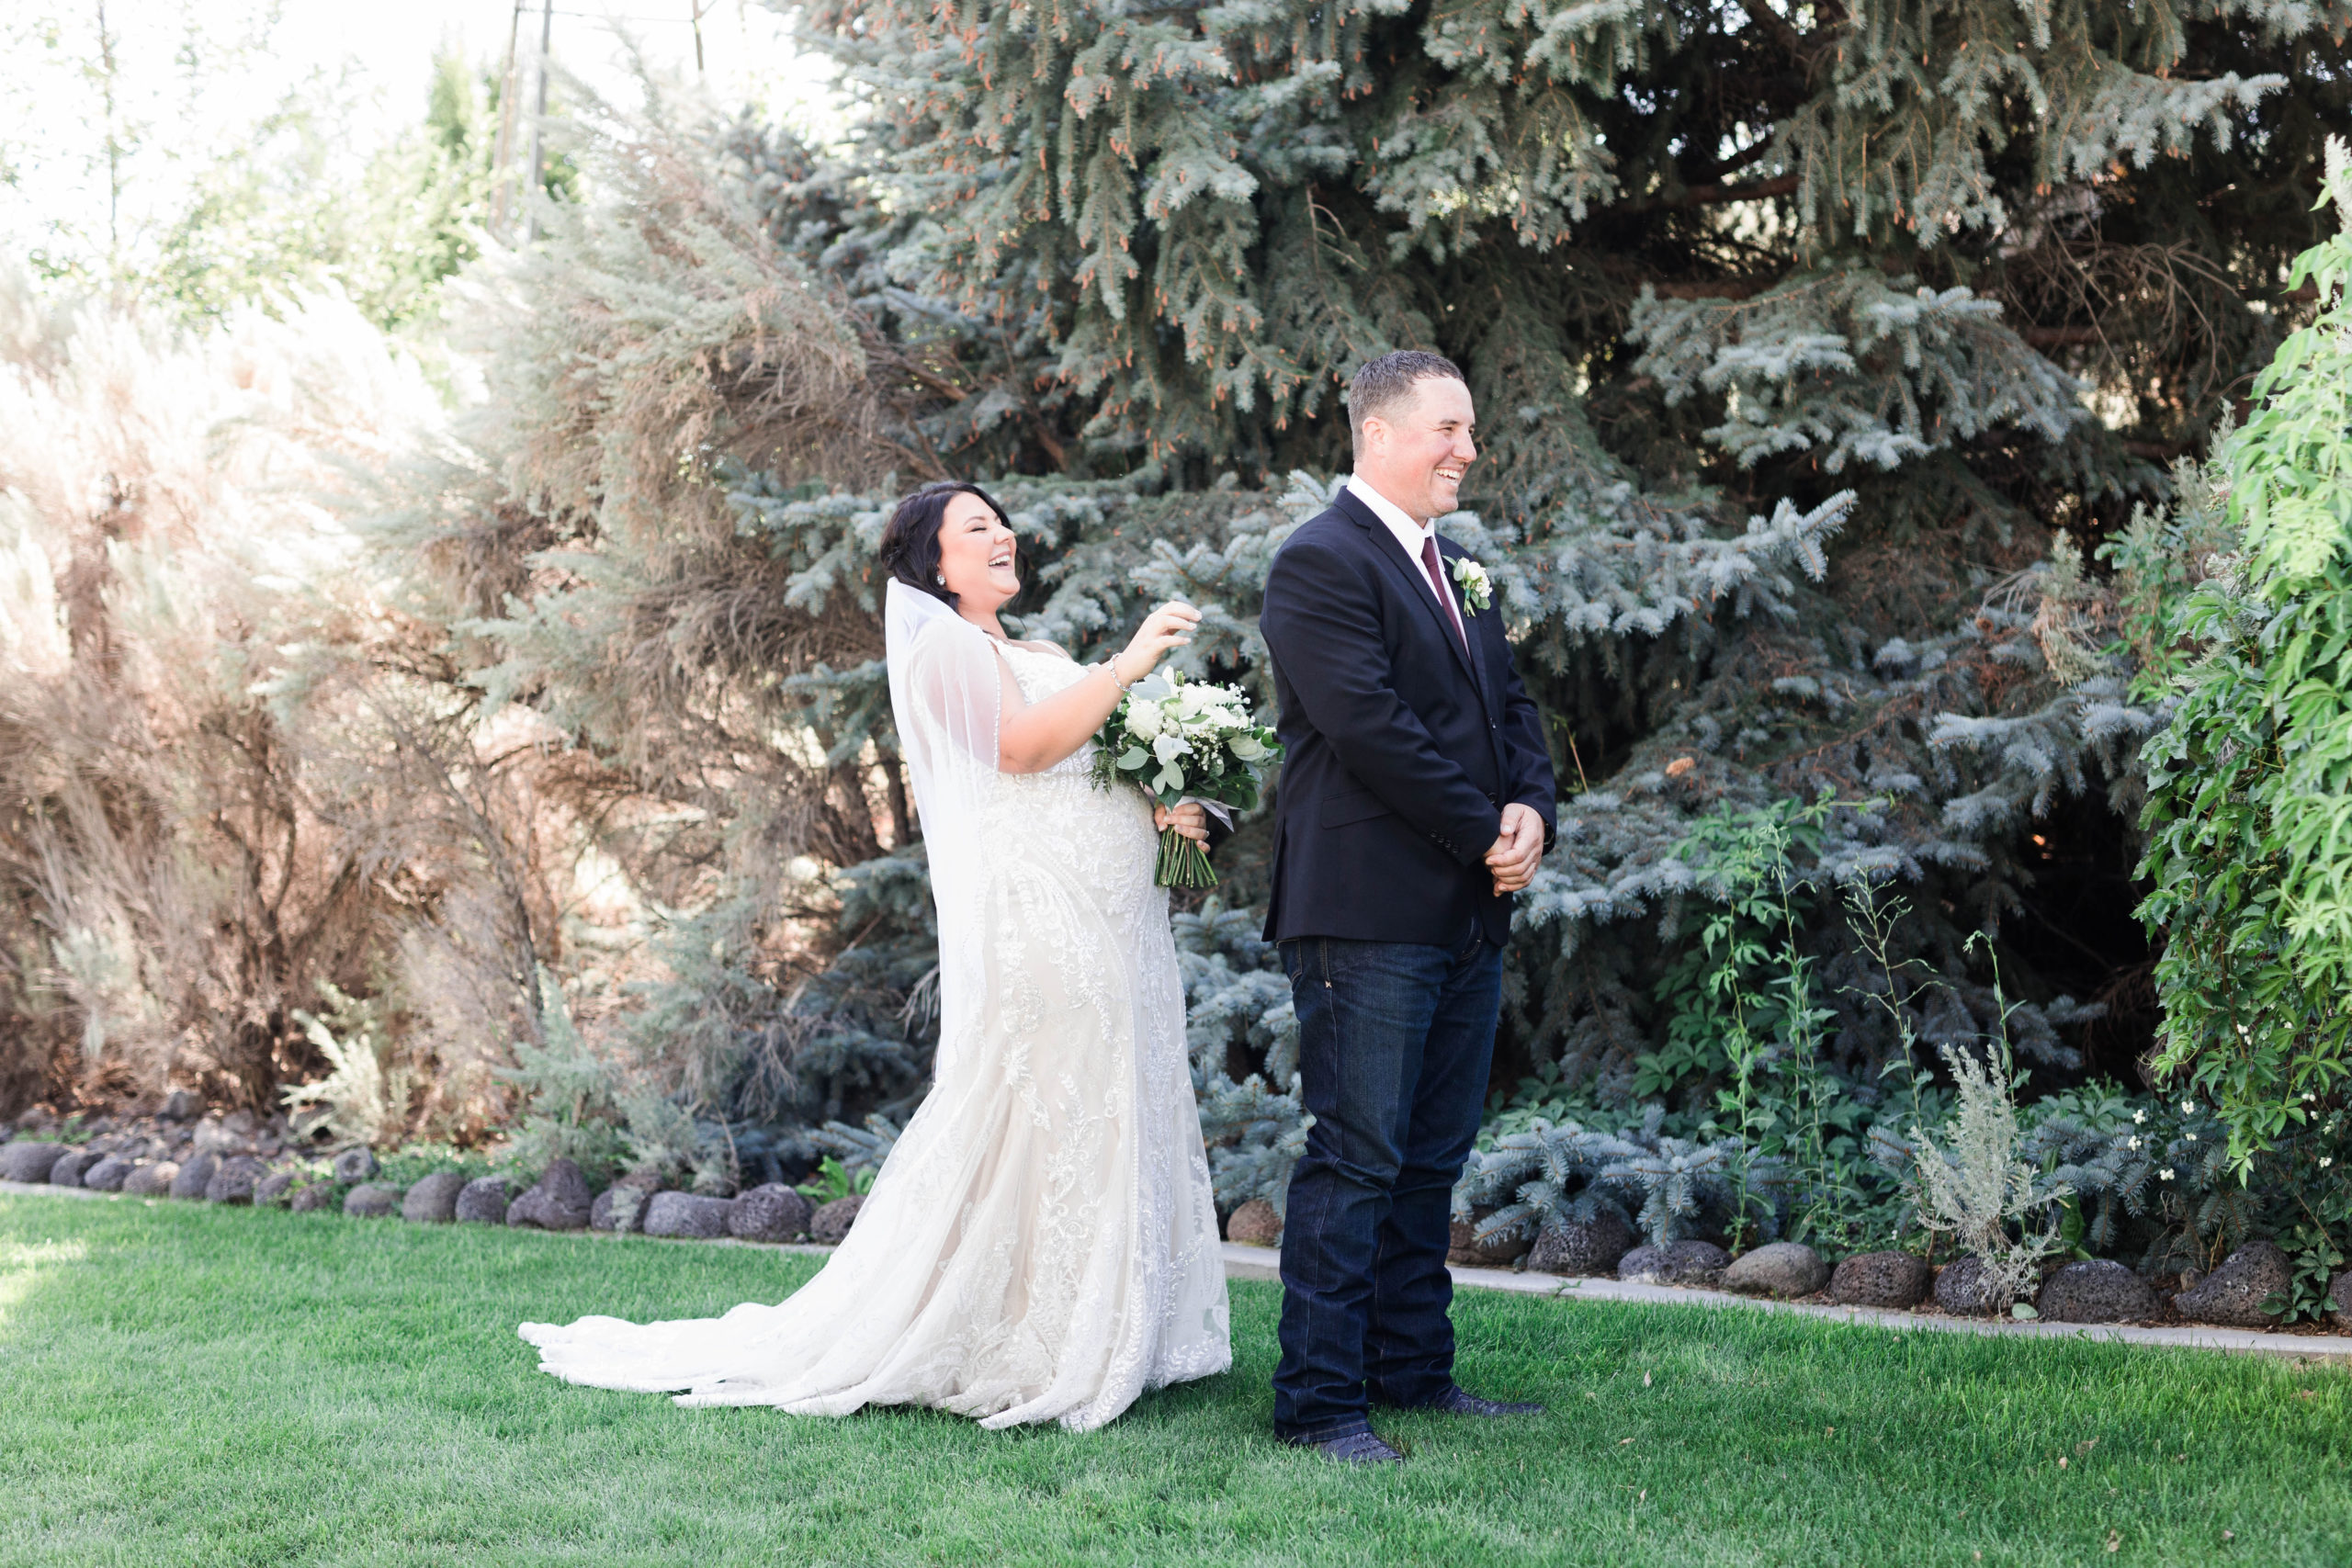 Boise wedding photographer captures bride and groom laughing during first look